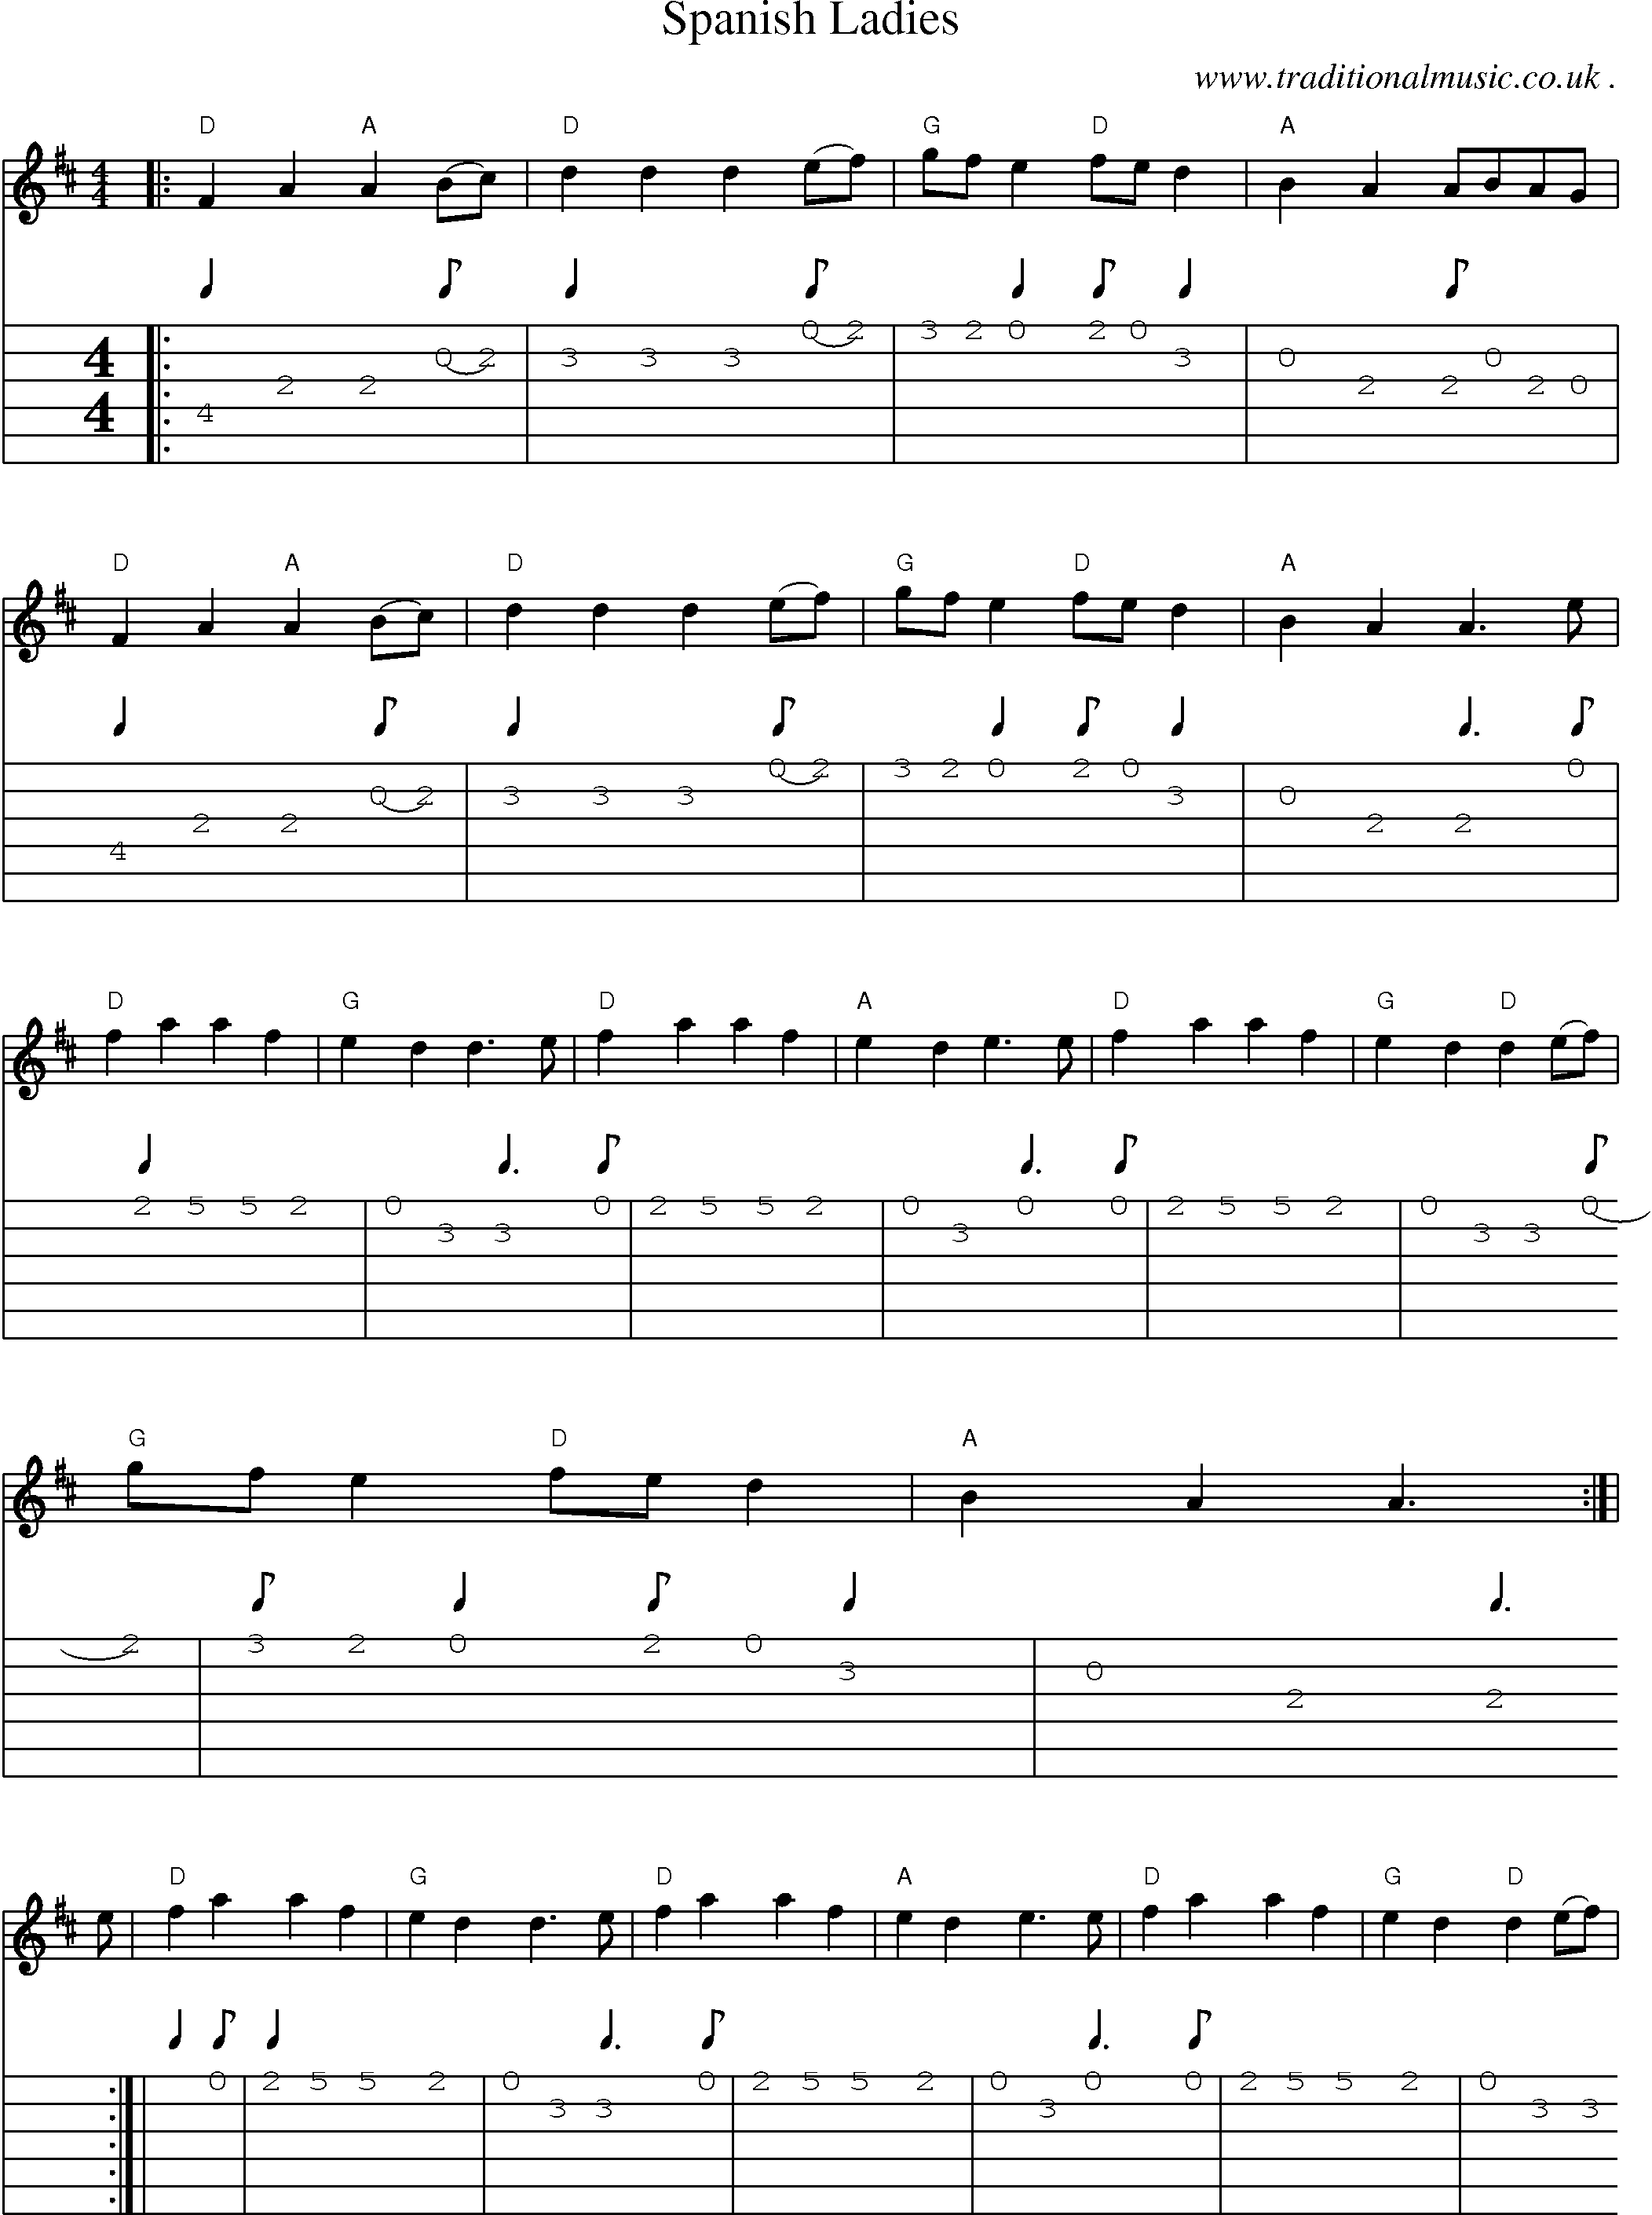 Sheet-music  score, Chords and Guitar Tabs for Spanish Ladies